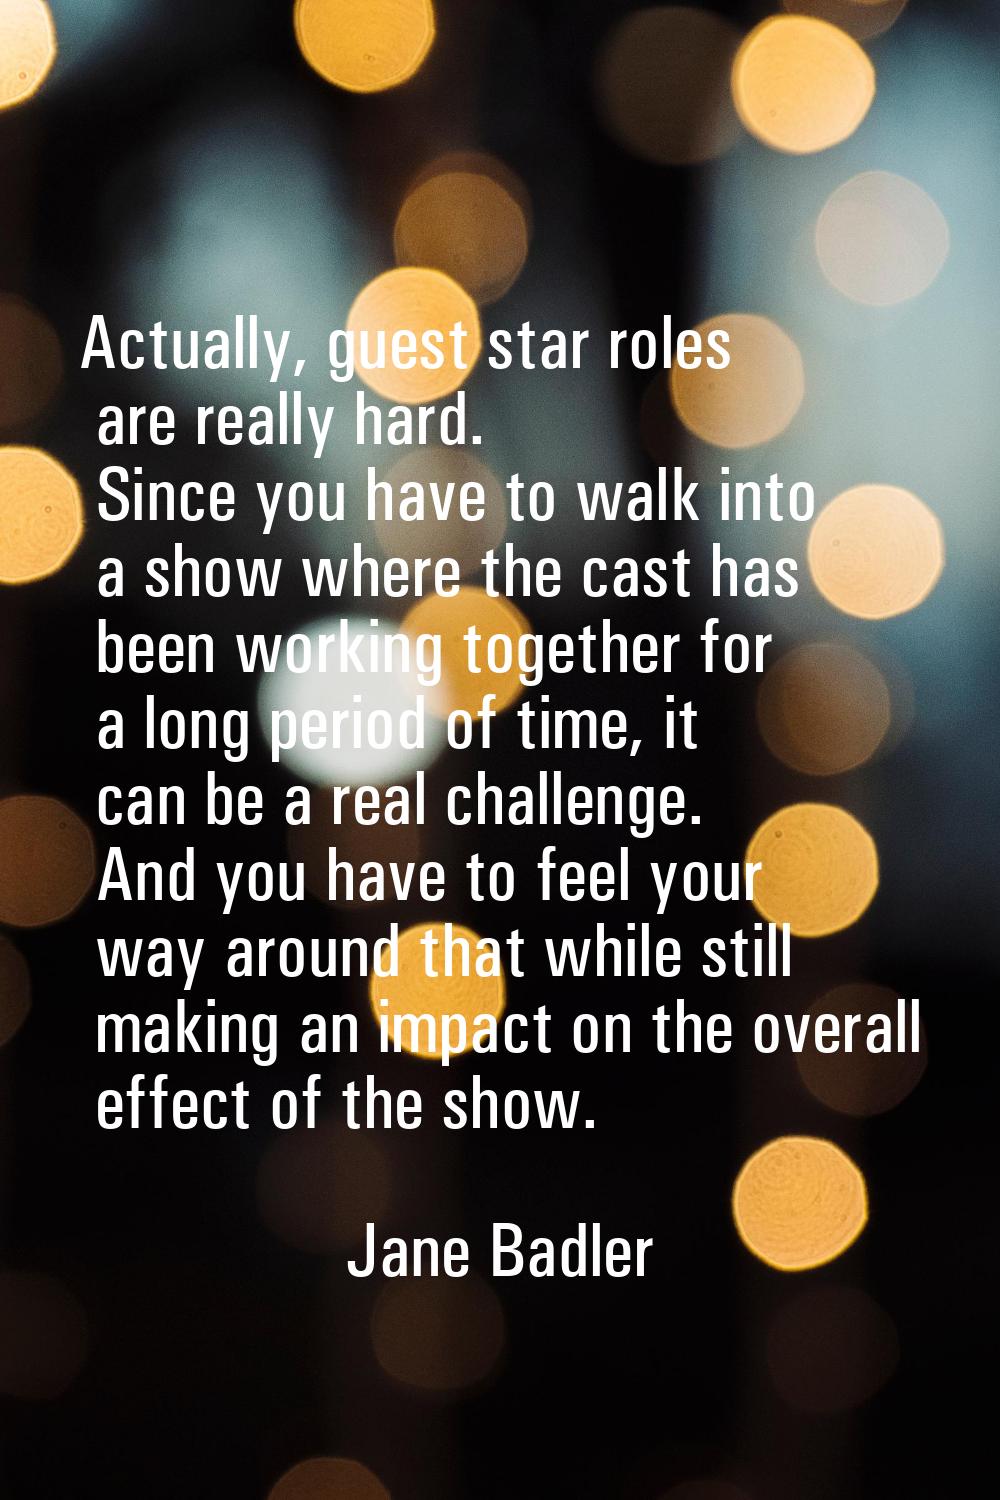 Actually, guest star roles are really hard. Since you have to walk into a show where the cast has b